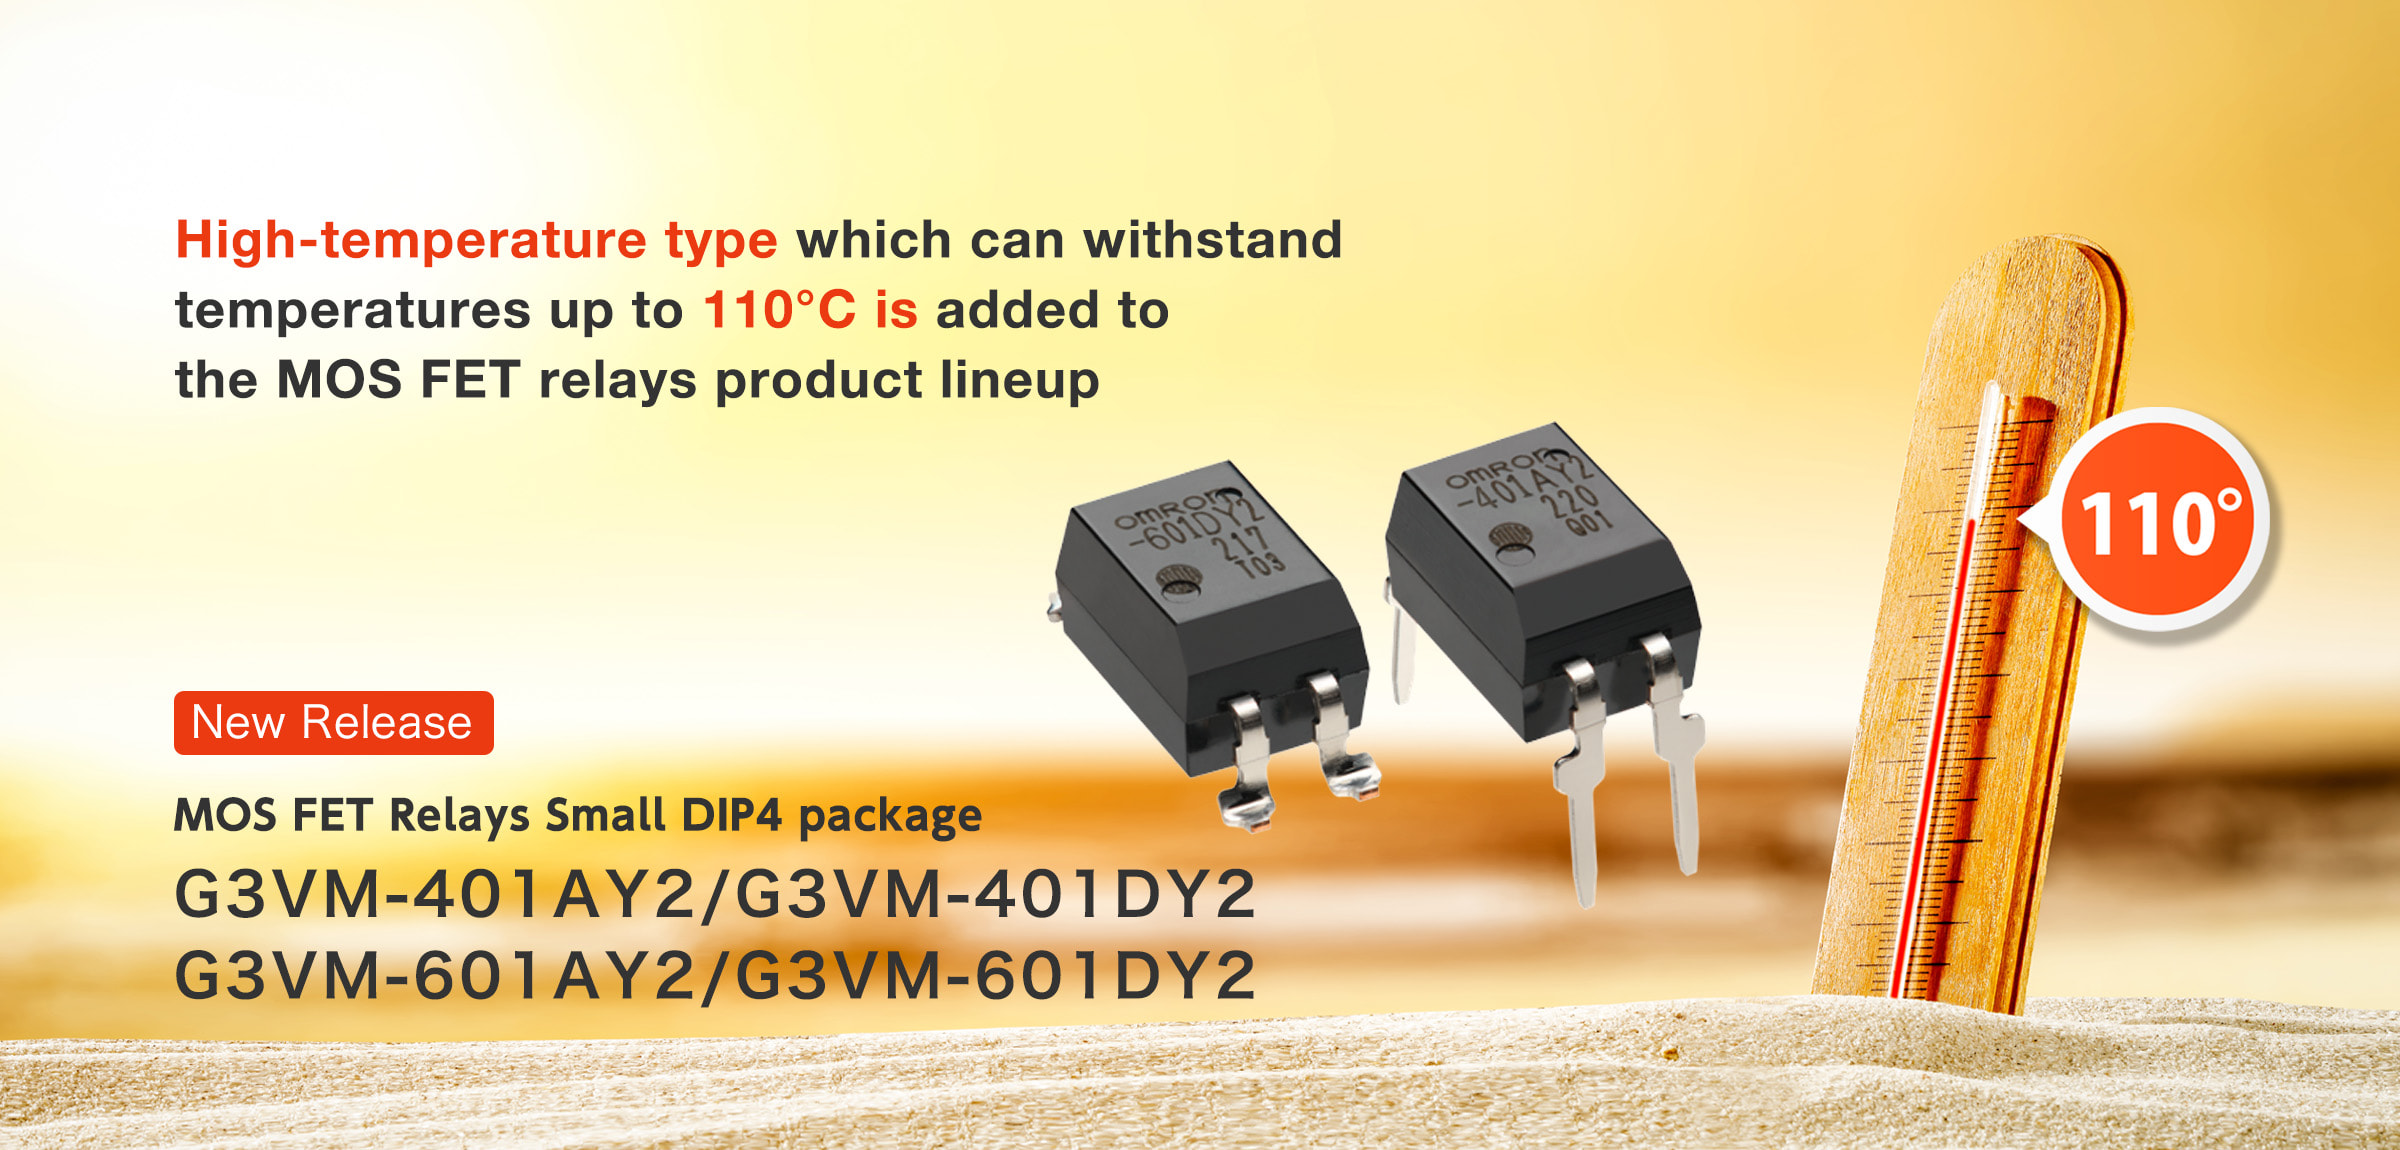 High-temperature type which can withstand temperatures up to 110°C is added to the MOS FET relays product lineup MOS FET Relays Small DIP4 package G3VM-401AY2/G3VM-401DY2, G3VM-601AY2/G3VM-601DY2